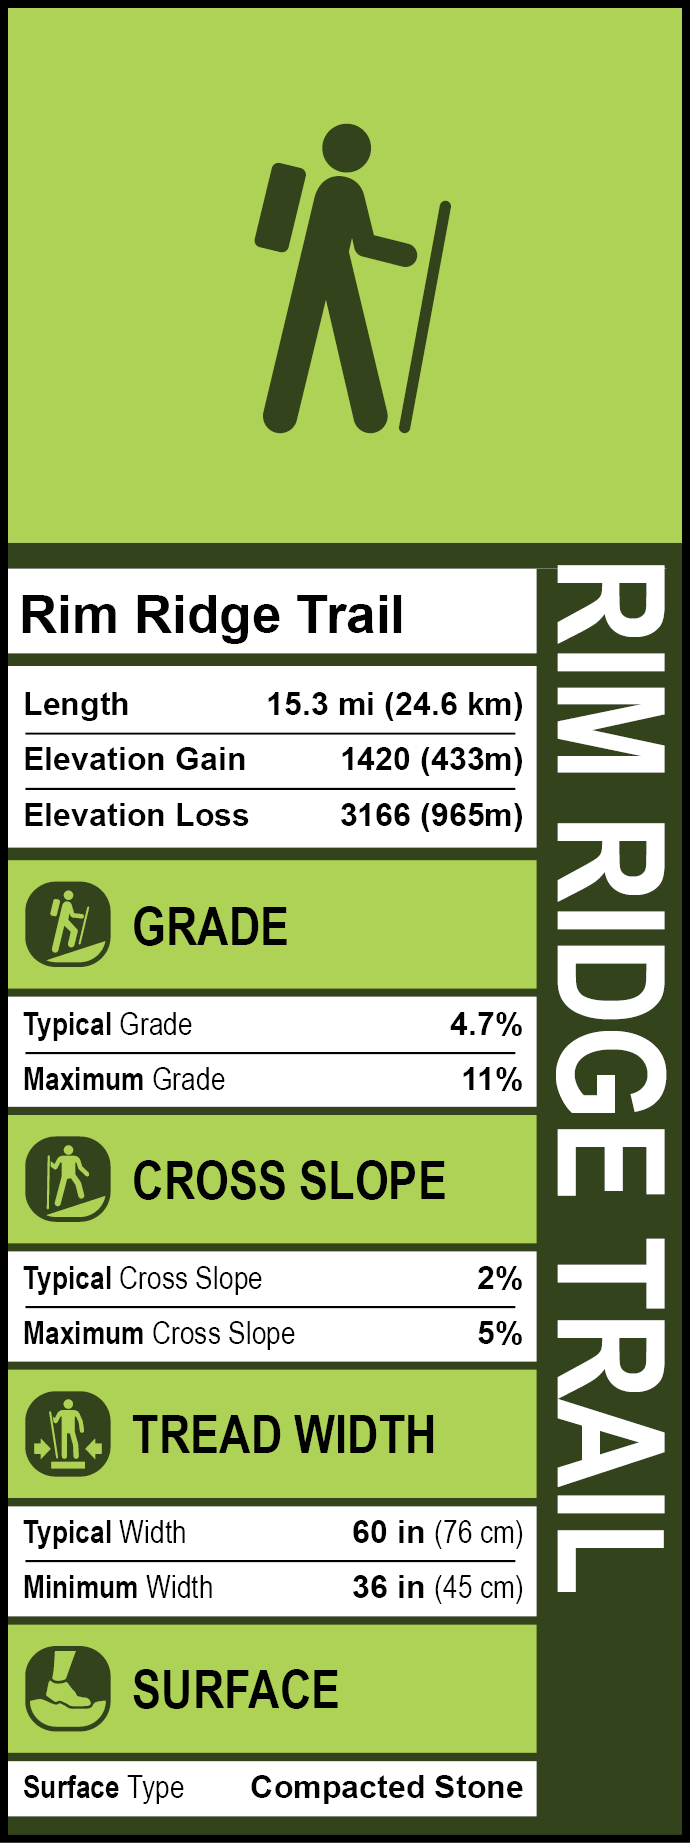 Trailhead sign with hiker pictogram, trail name, length, elevation change, grade, cross slope, tread width, and surface type